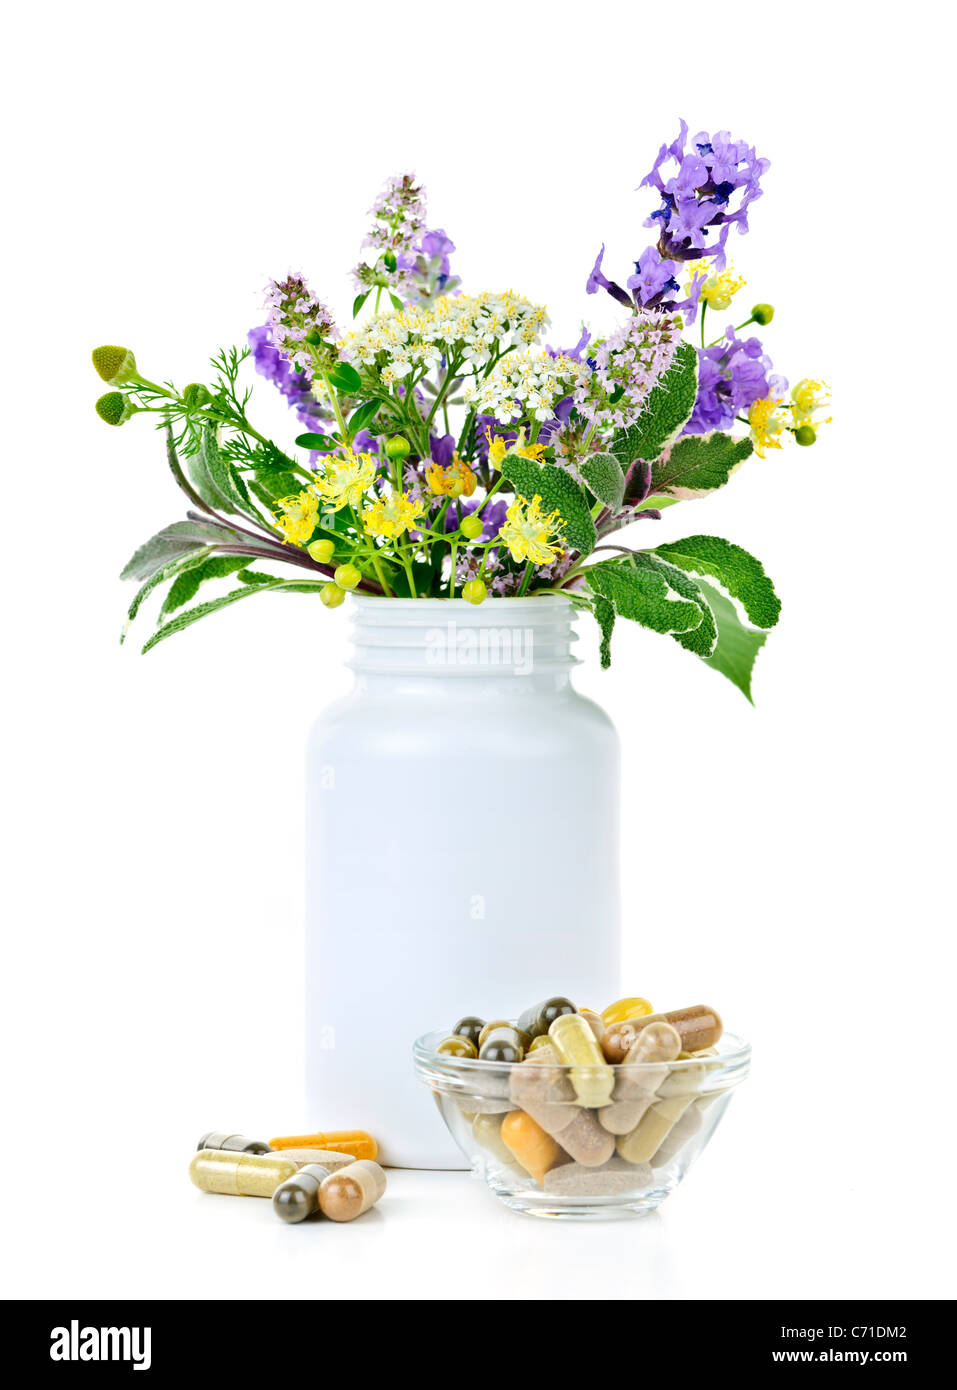 Herb plants with mix of alternative medicine herbal supplements and pills Stock Photo